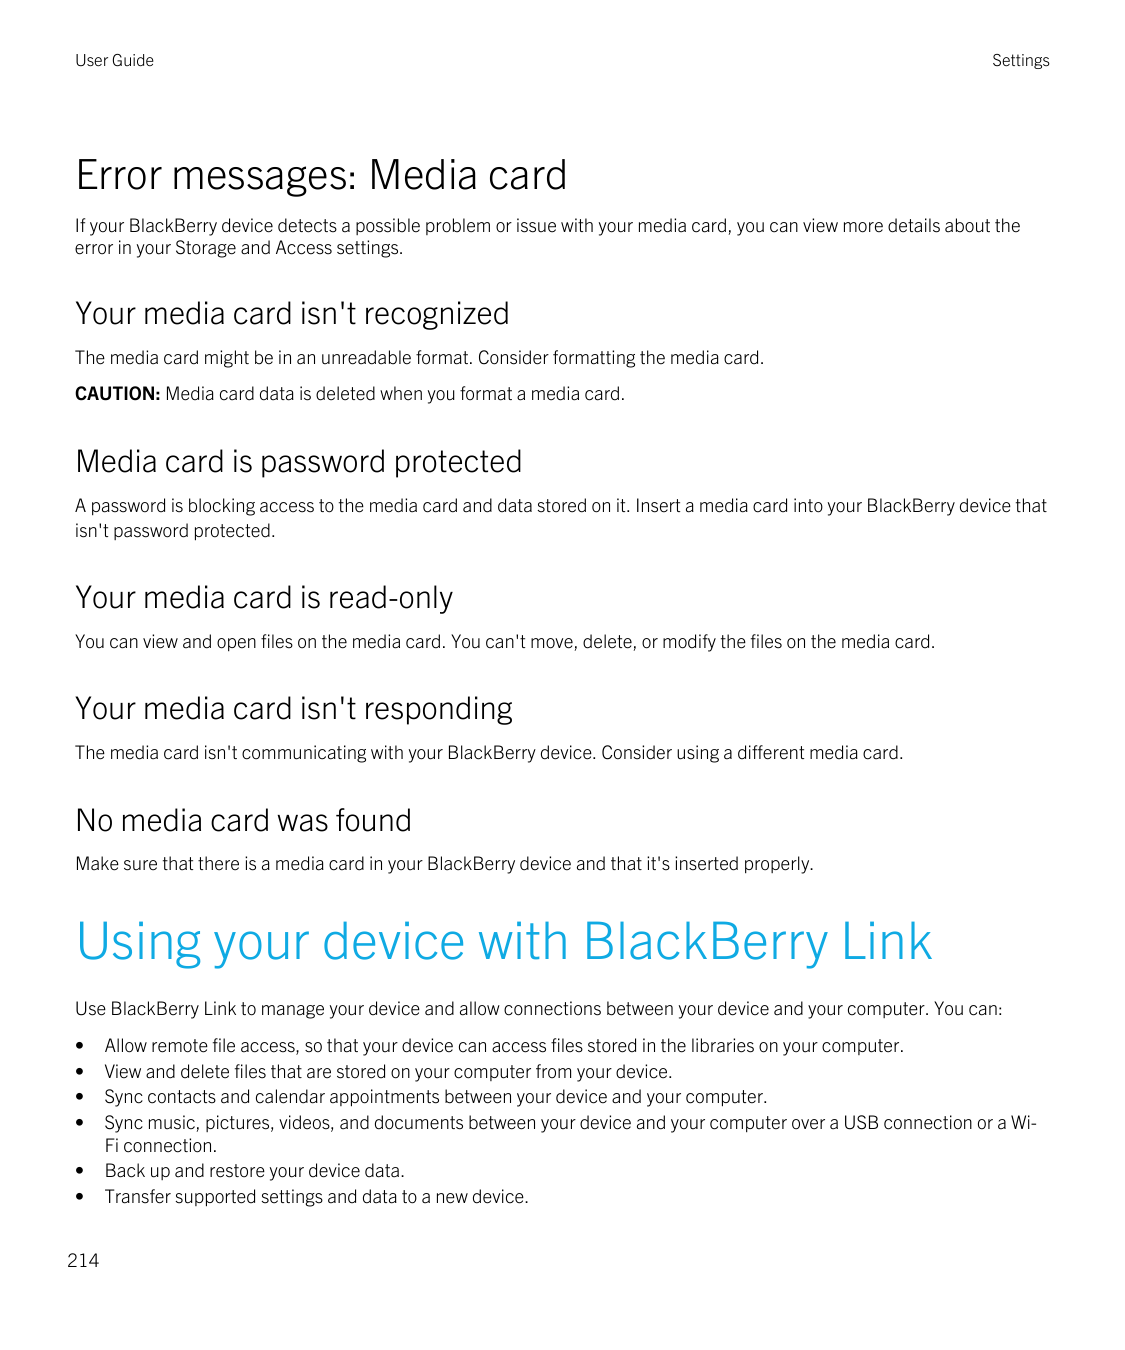 User GuideSettingsError messages: Media cardIf your BlackBerry device detects a possible problem or issue with your media card, 